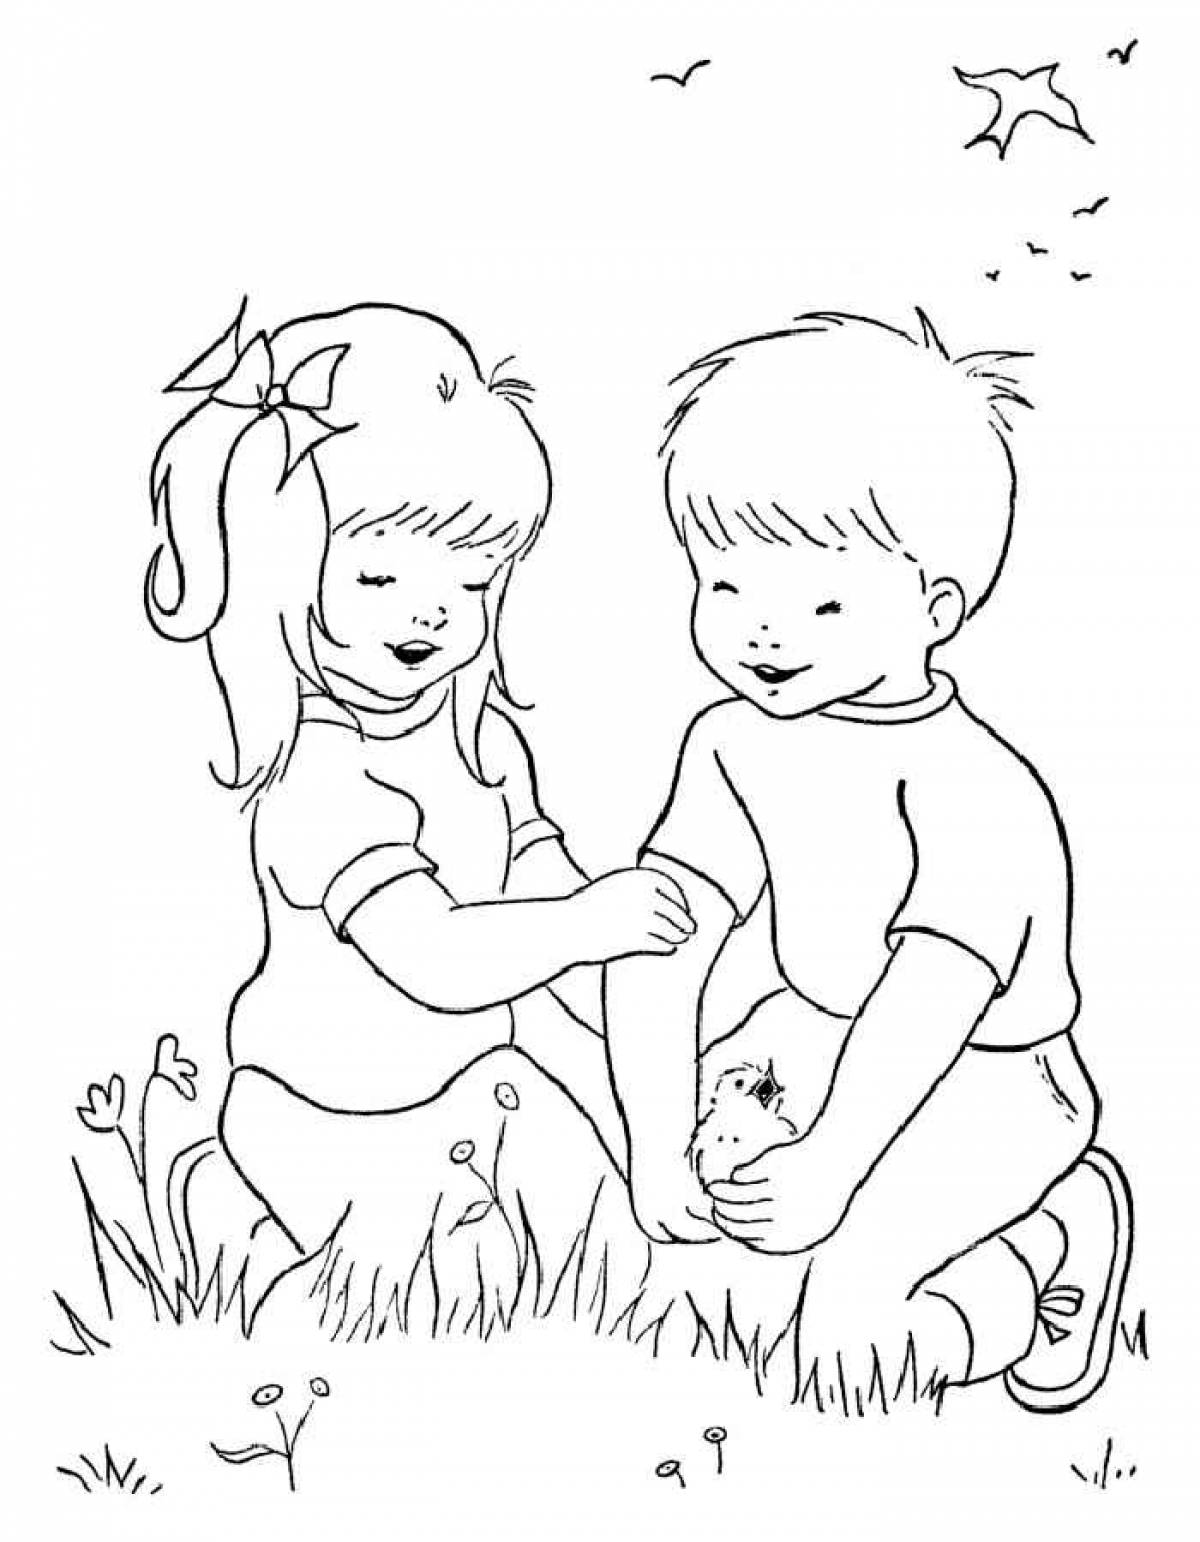 Boy and girl on the grass